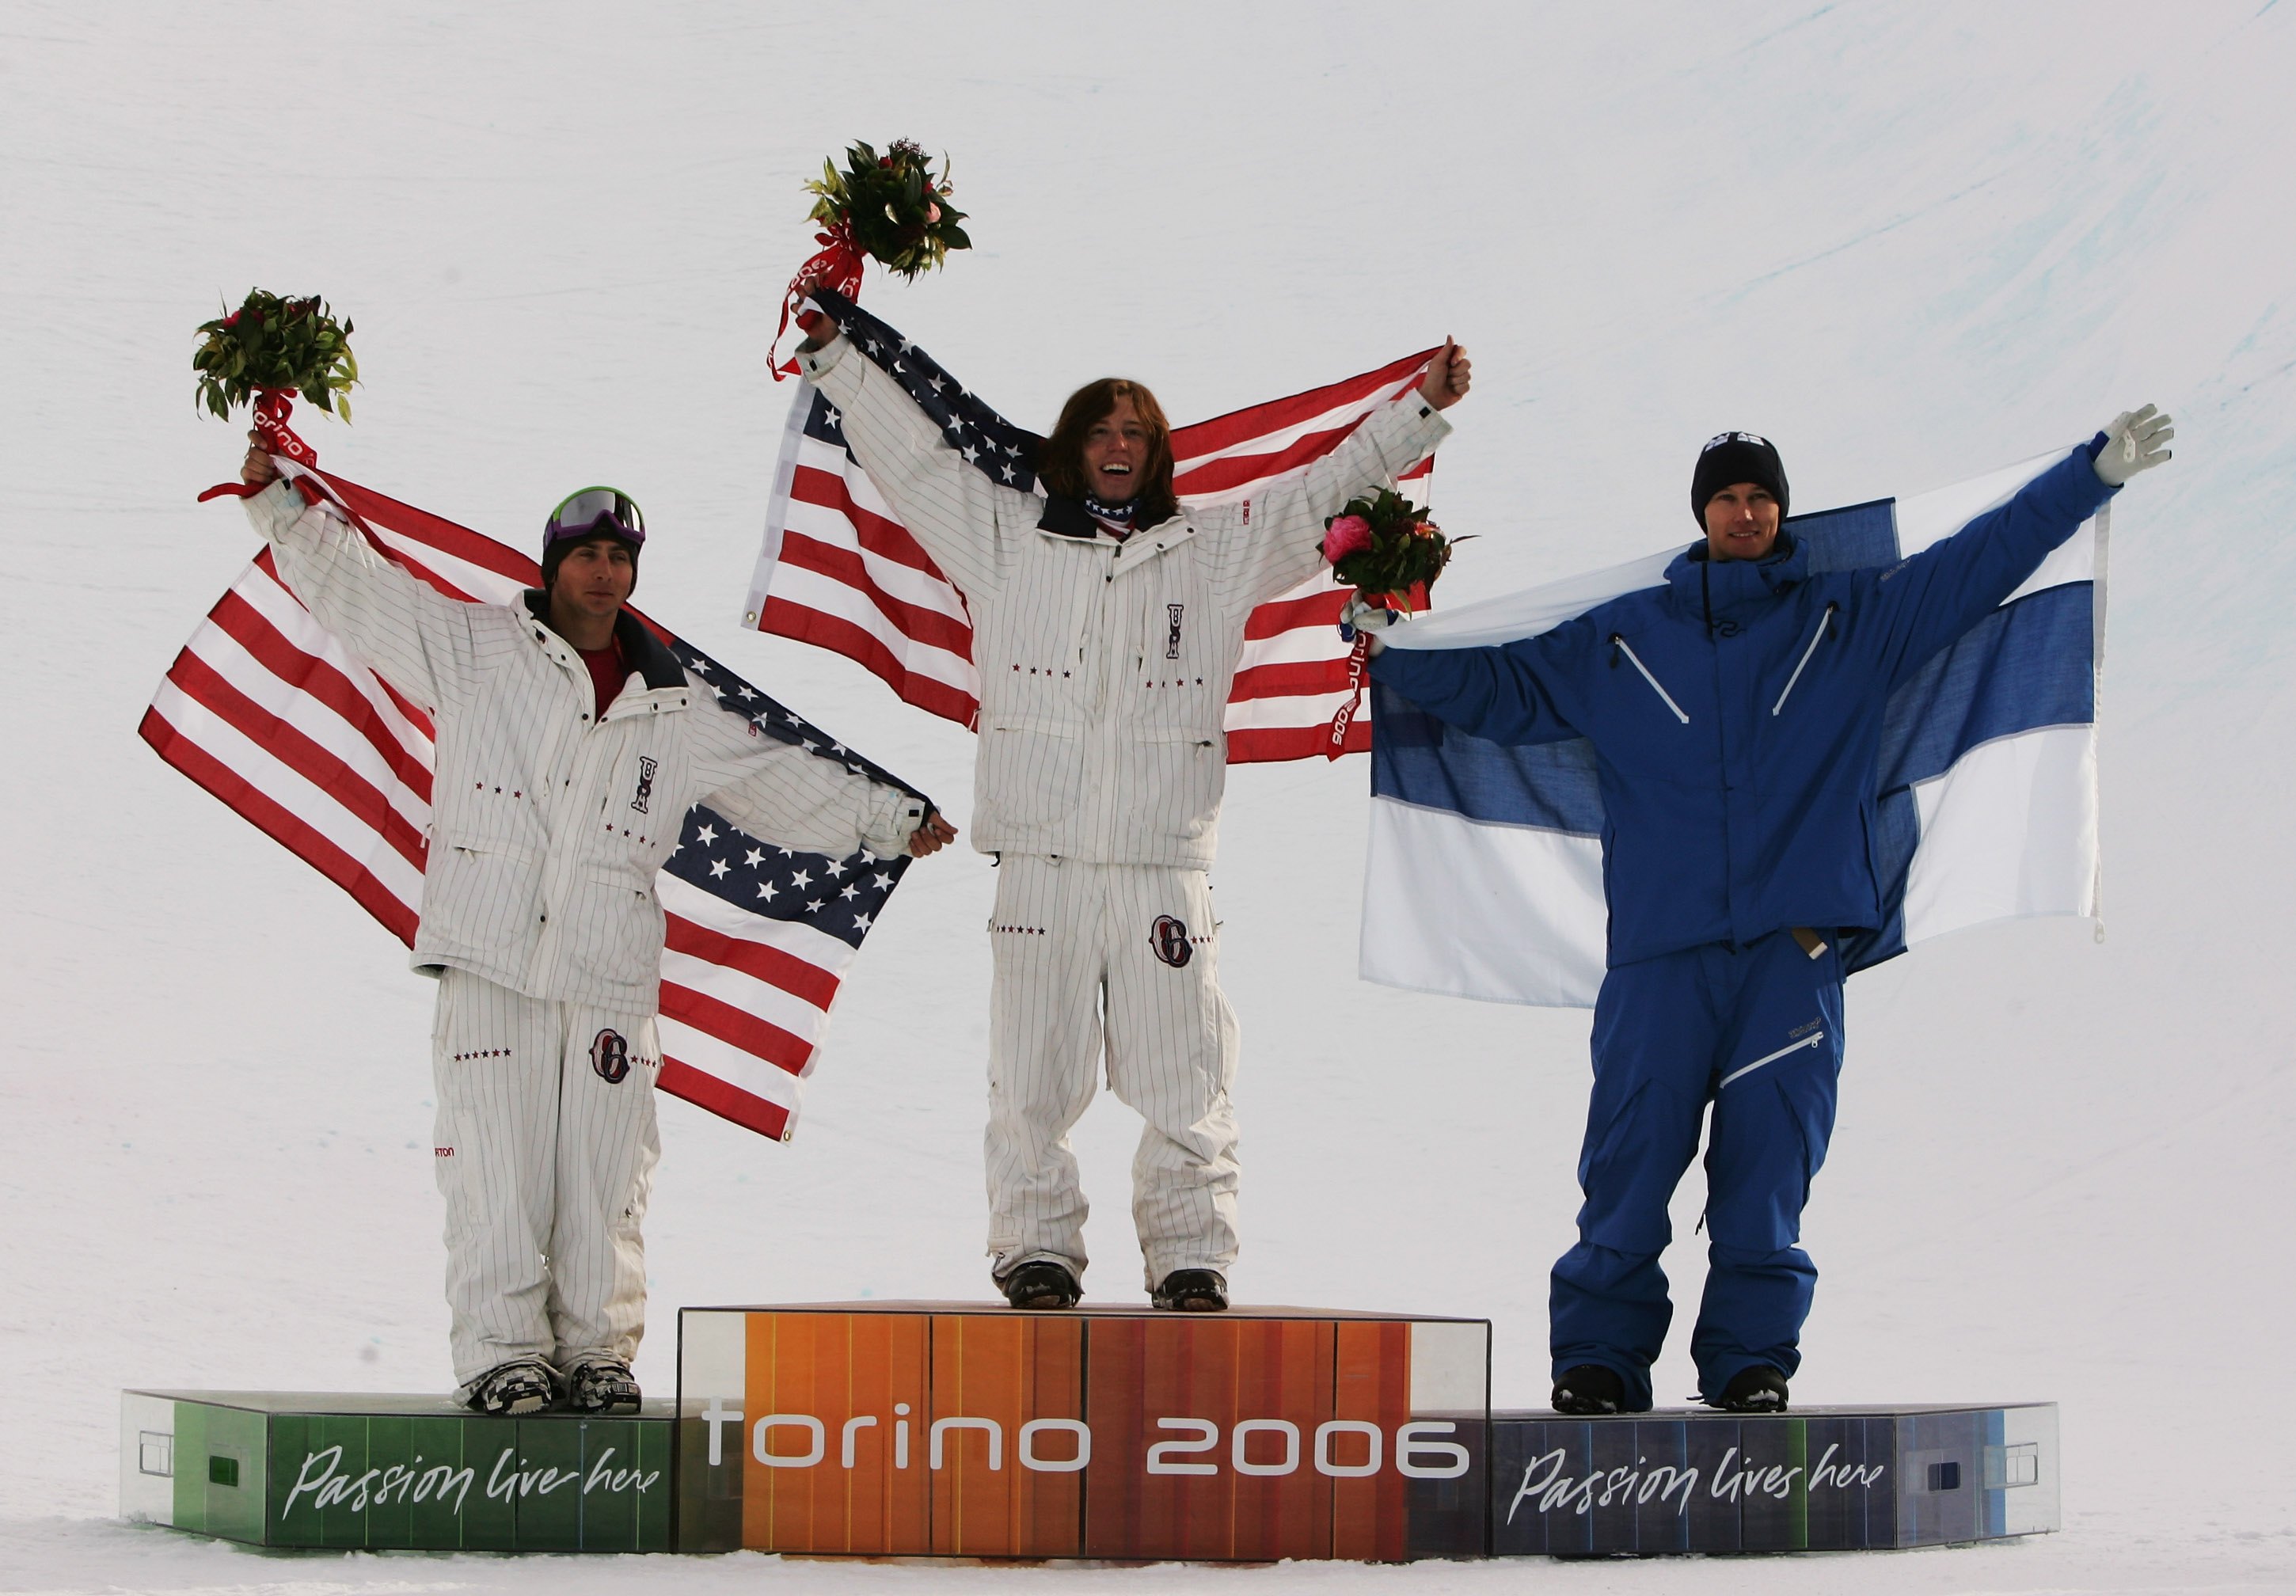 Shaun White (C) celebrates after winning the Gold Medal with teammate Daniel Kass (L) and Markku Koski of Finland in the Mens Snowboard Half Pipe Final at the 2006 Turin Winter Olympic Games in Bardonecchia, Italy. Adam Pretty—Getty Images (Adam Pretty—Getty Images)